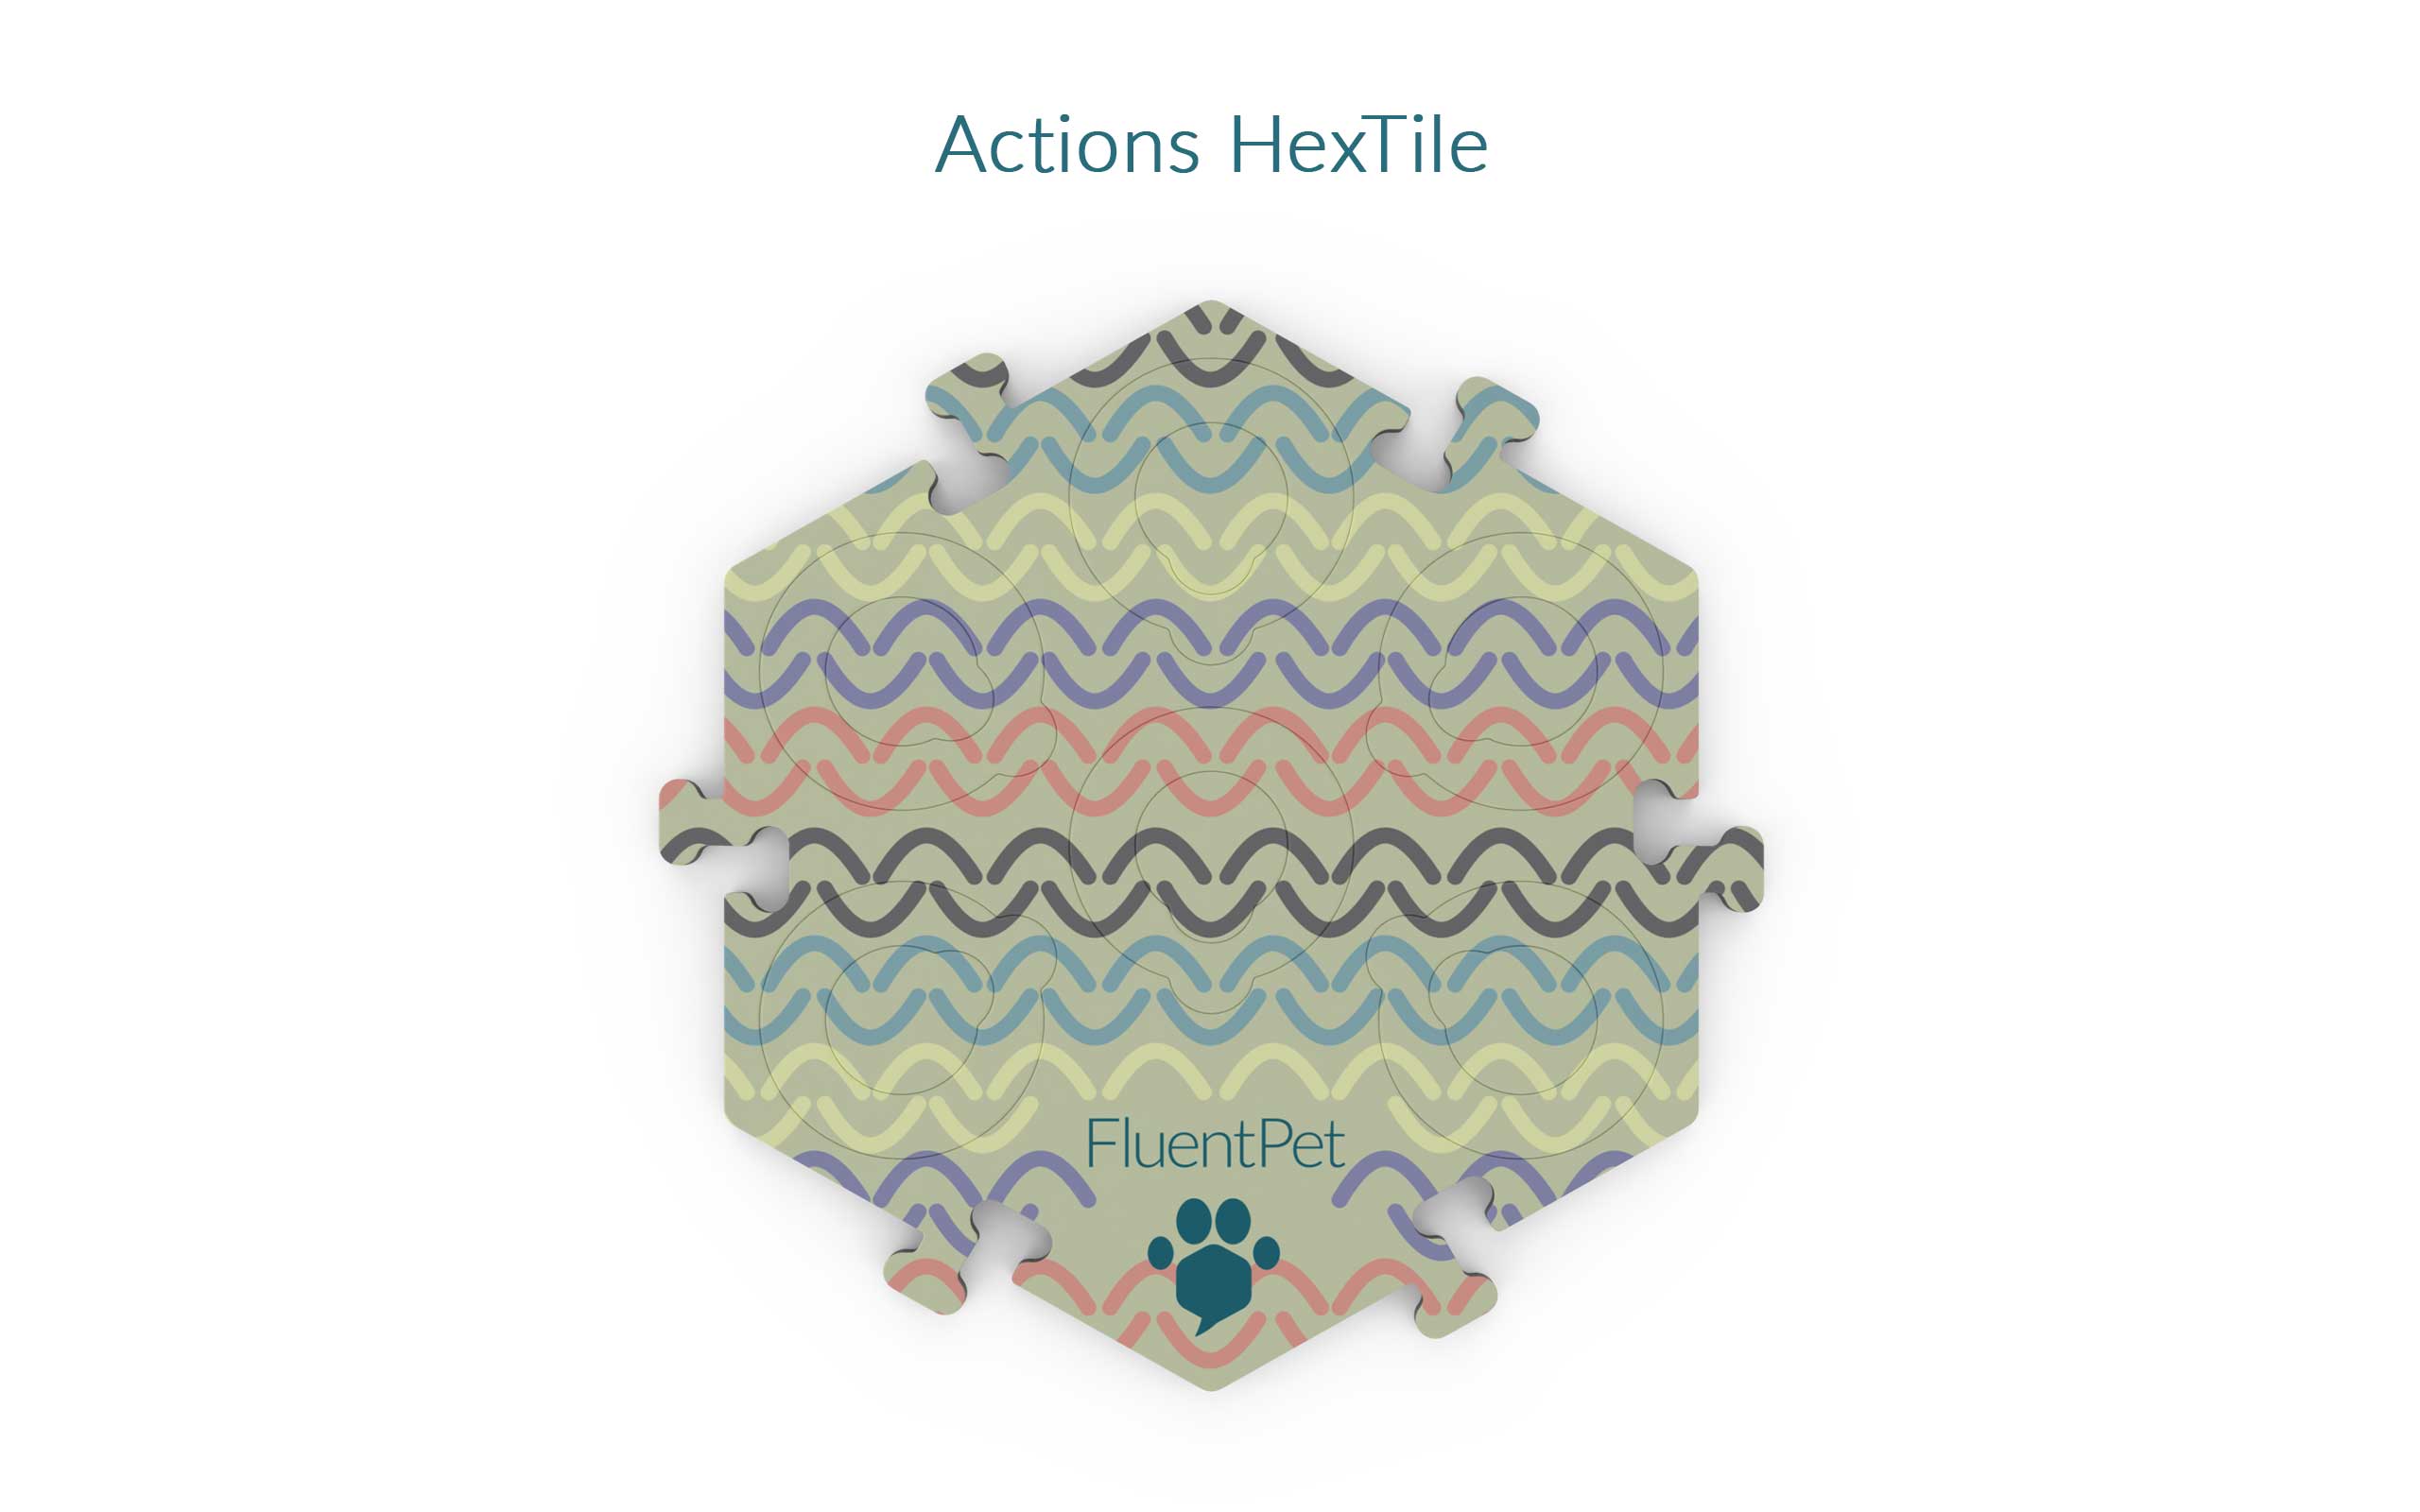 Great Hex tile Actions